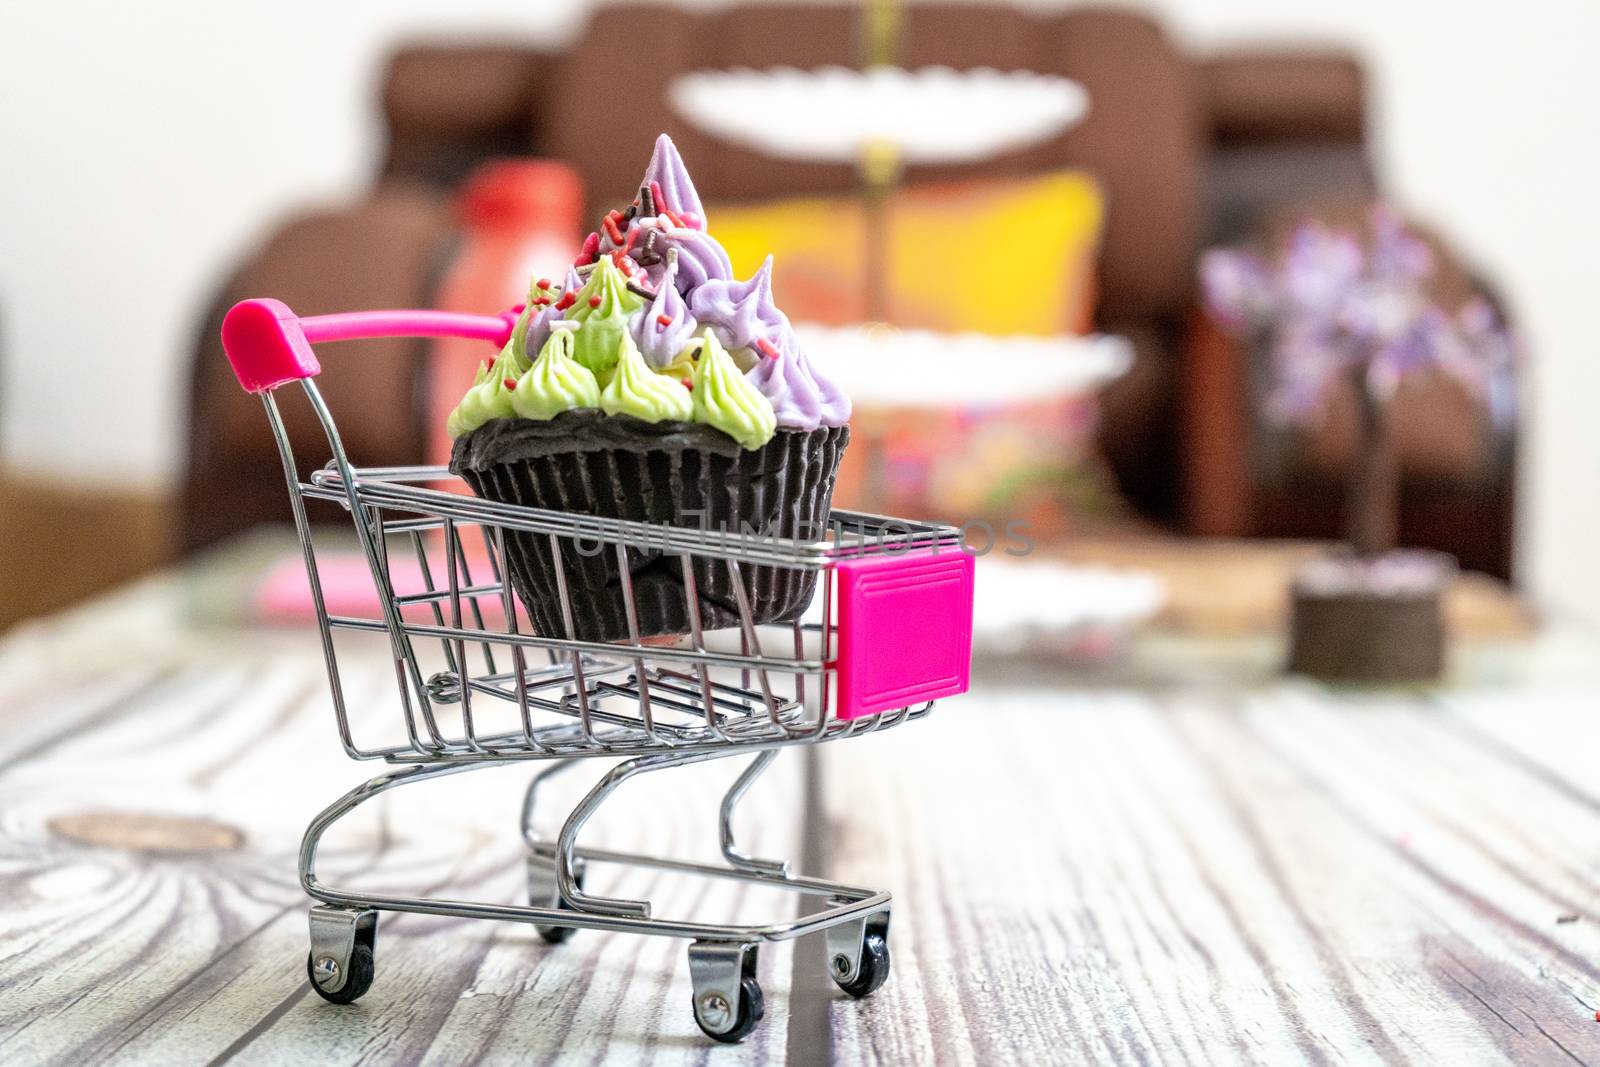 Beautifully iced cupcake with purple frosting and black chocolate base on a shopping cart on a wooden floor with blurred out background. Shows hobbies and skills people are leanring in the coronavirus pandemic